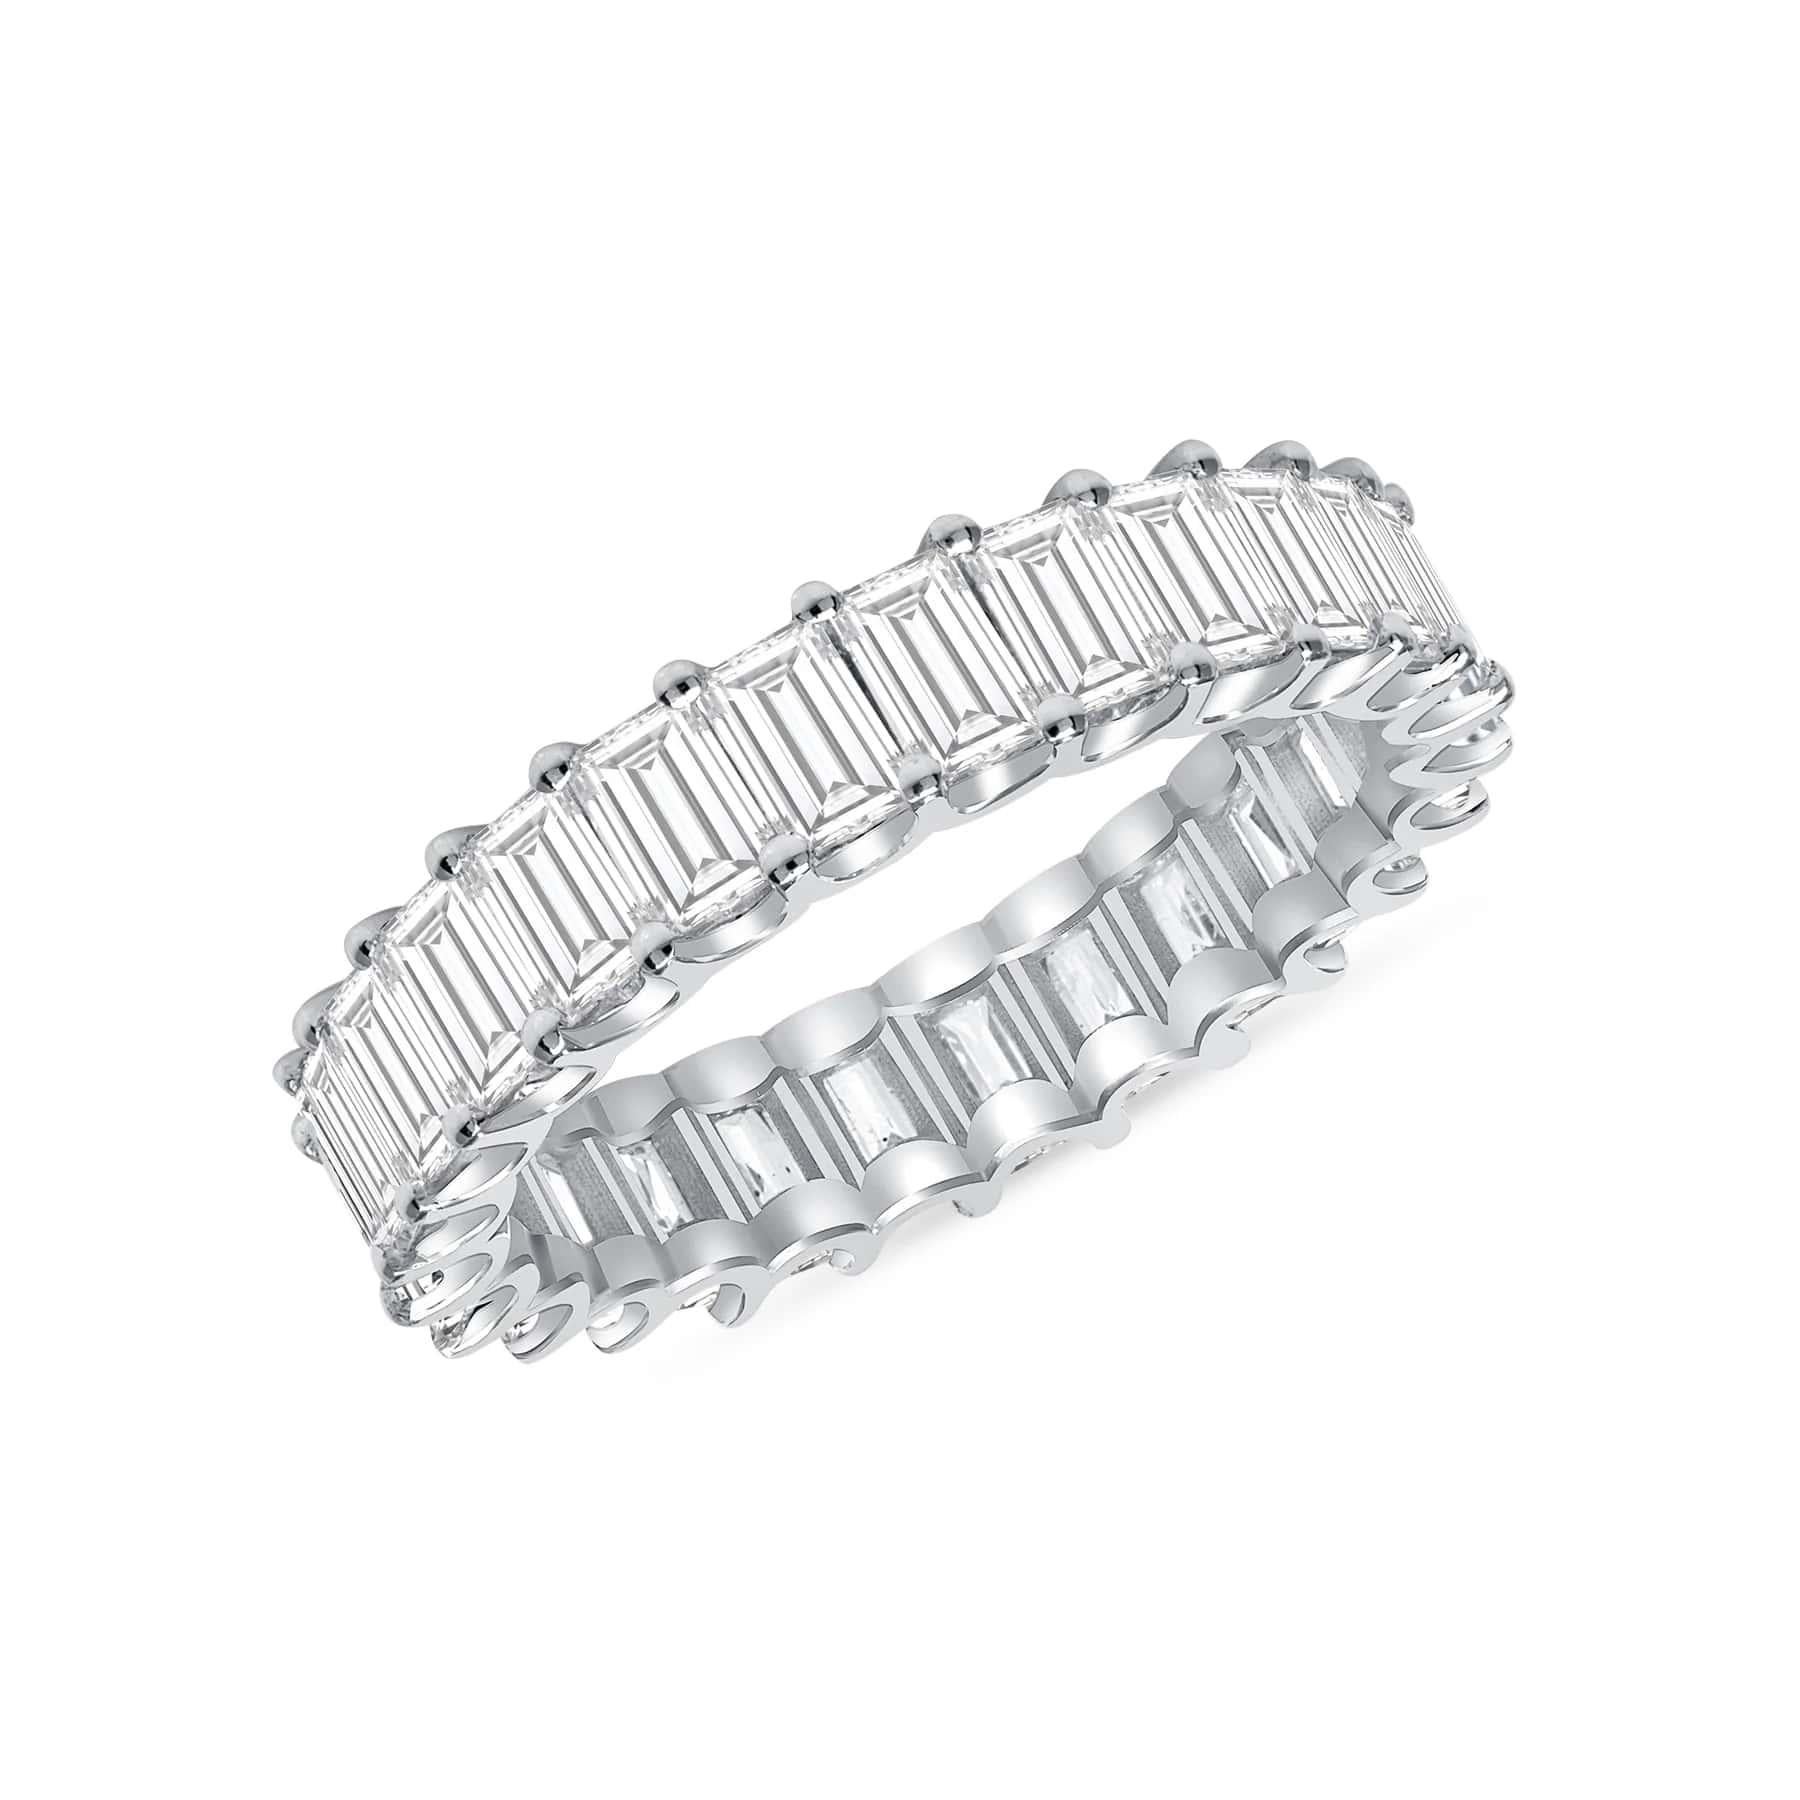 For Sale:  Maliyah's Baguette Eternity Band Ring 4